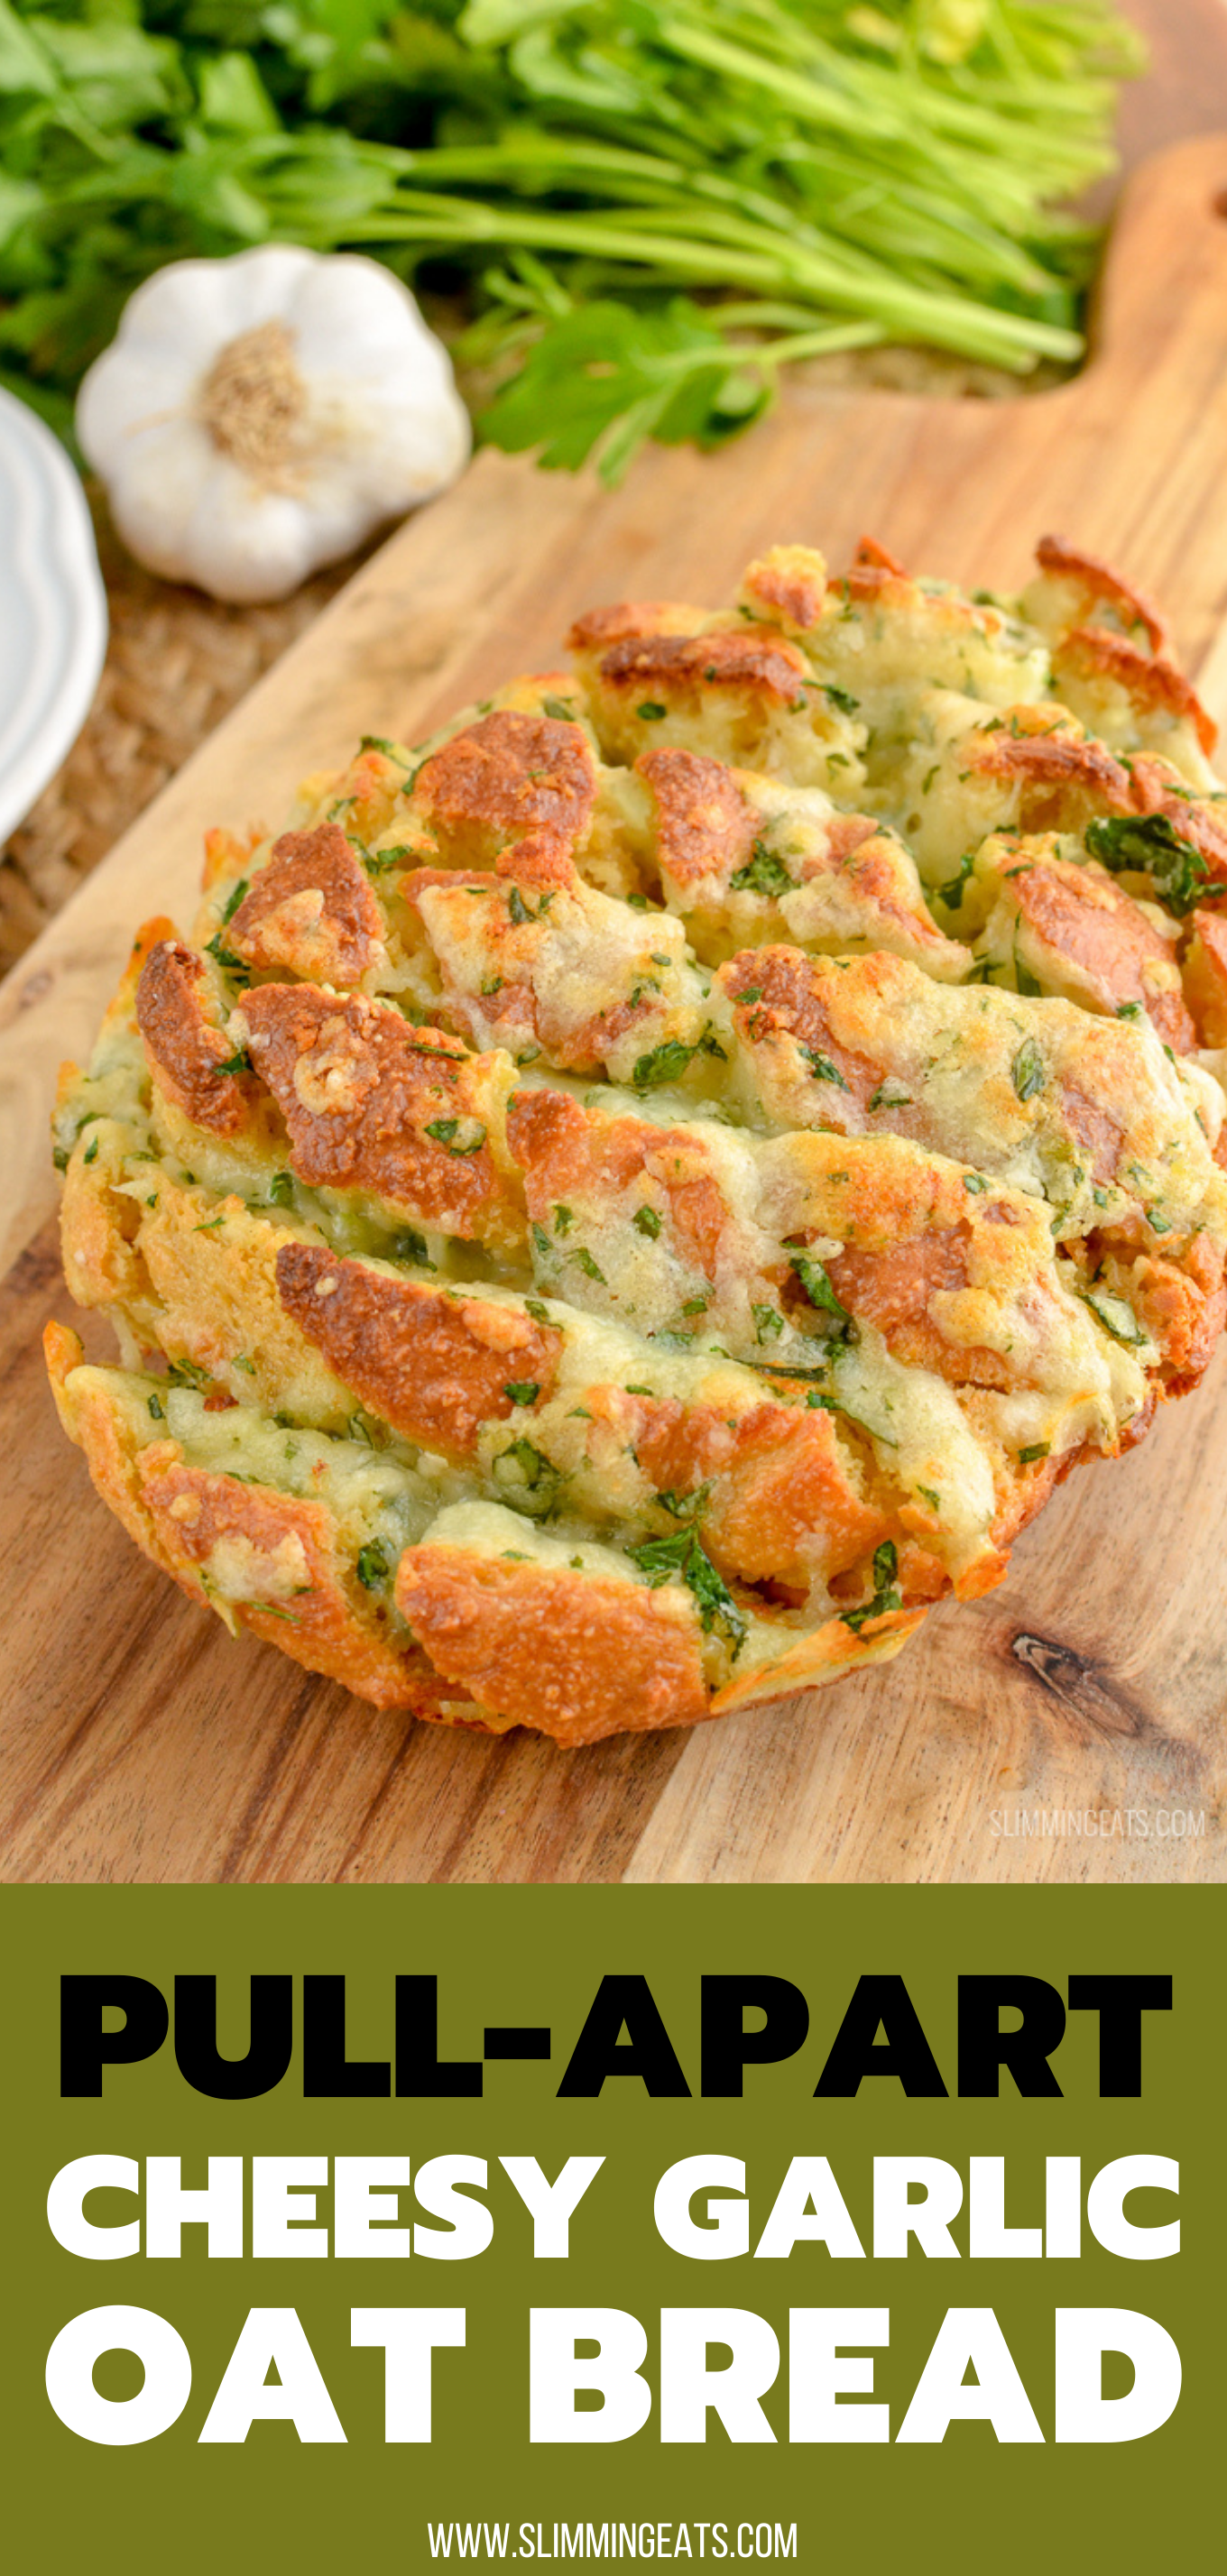 Pull-Apart Cheesy Garlic Oat Bread  on wooden board with garlic and herbs in background pin image